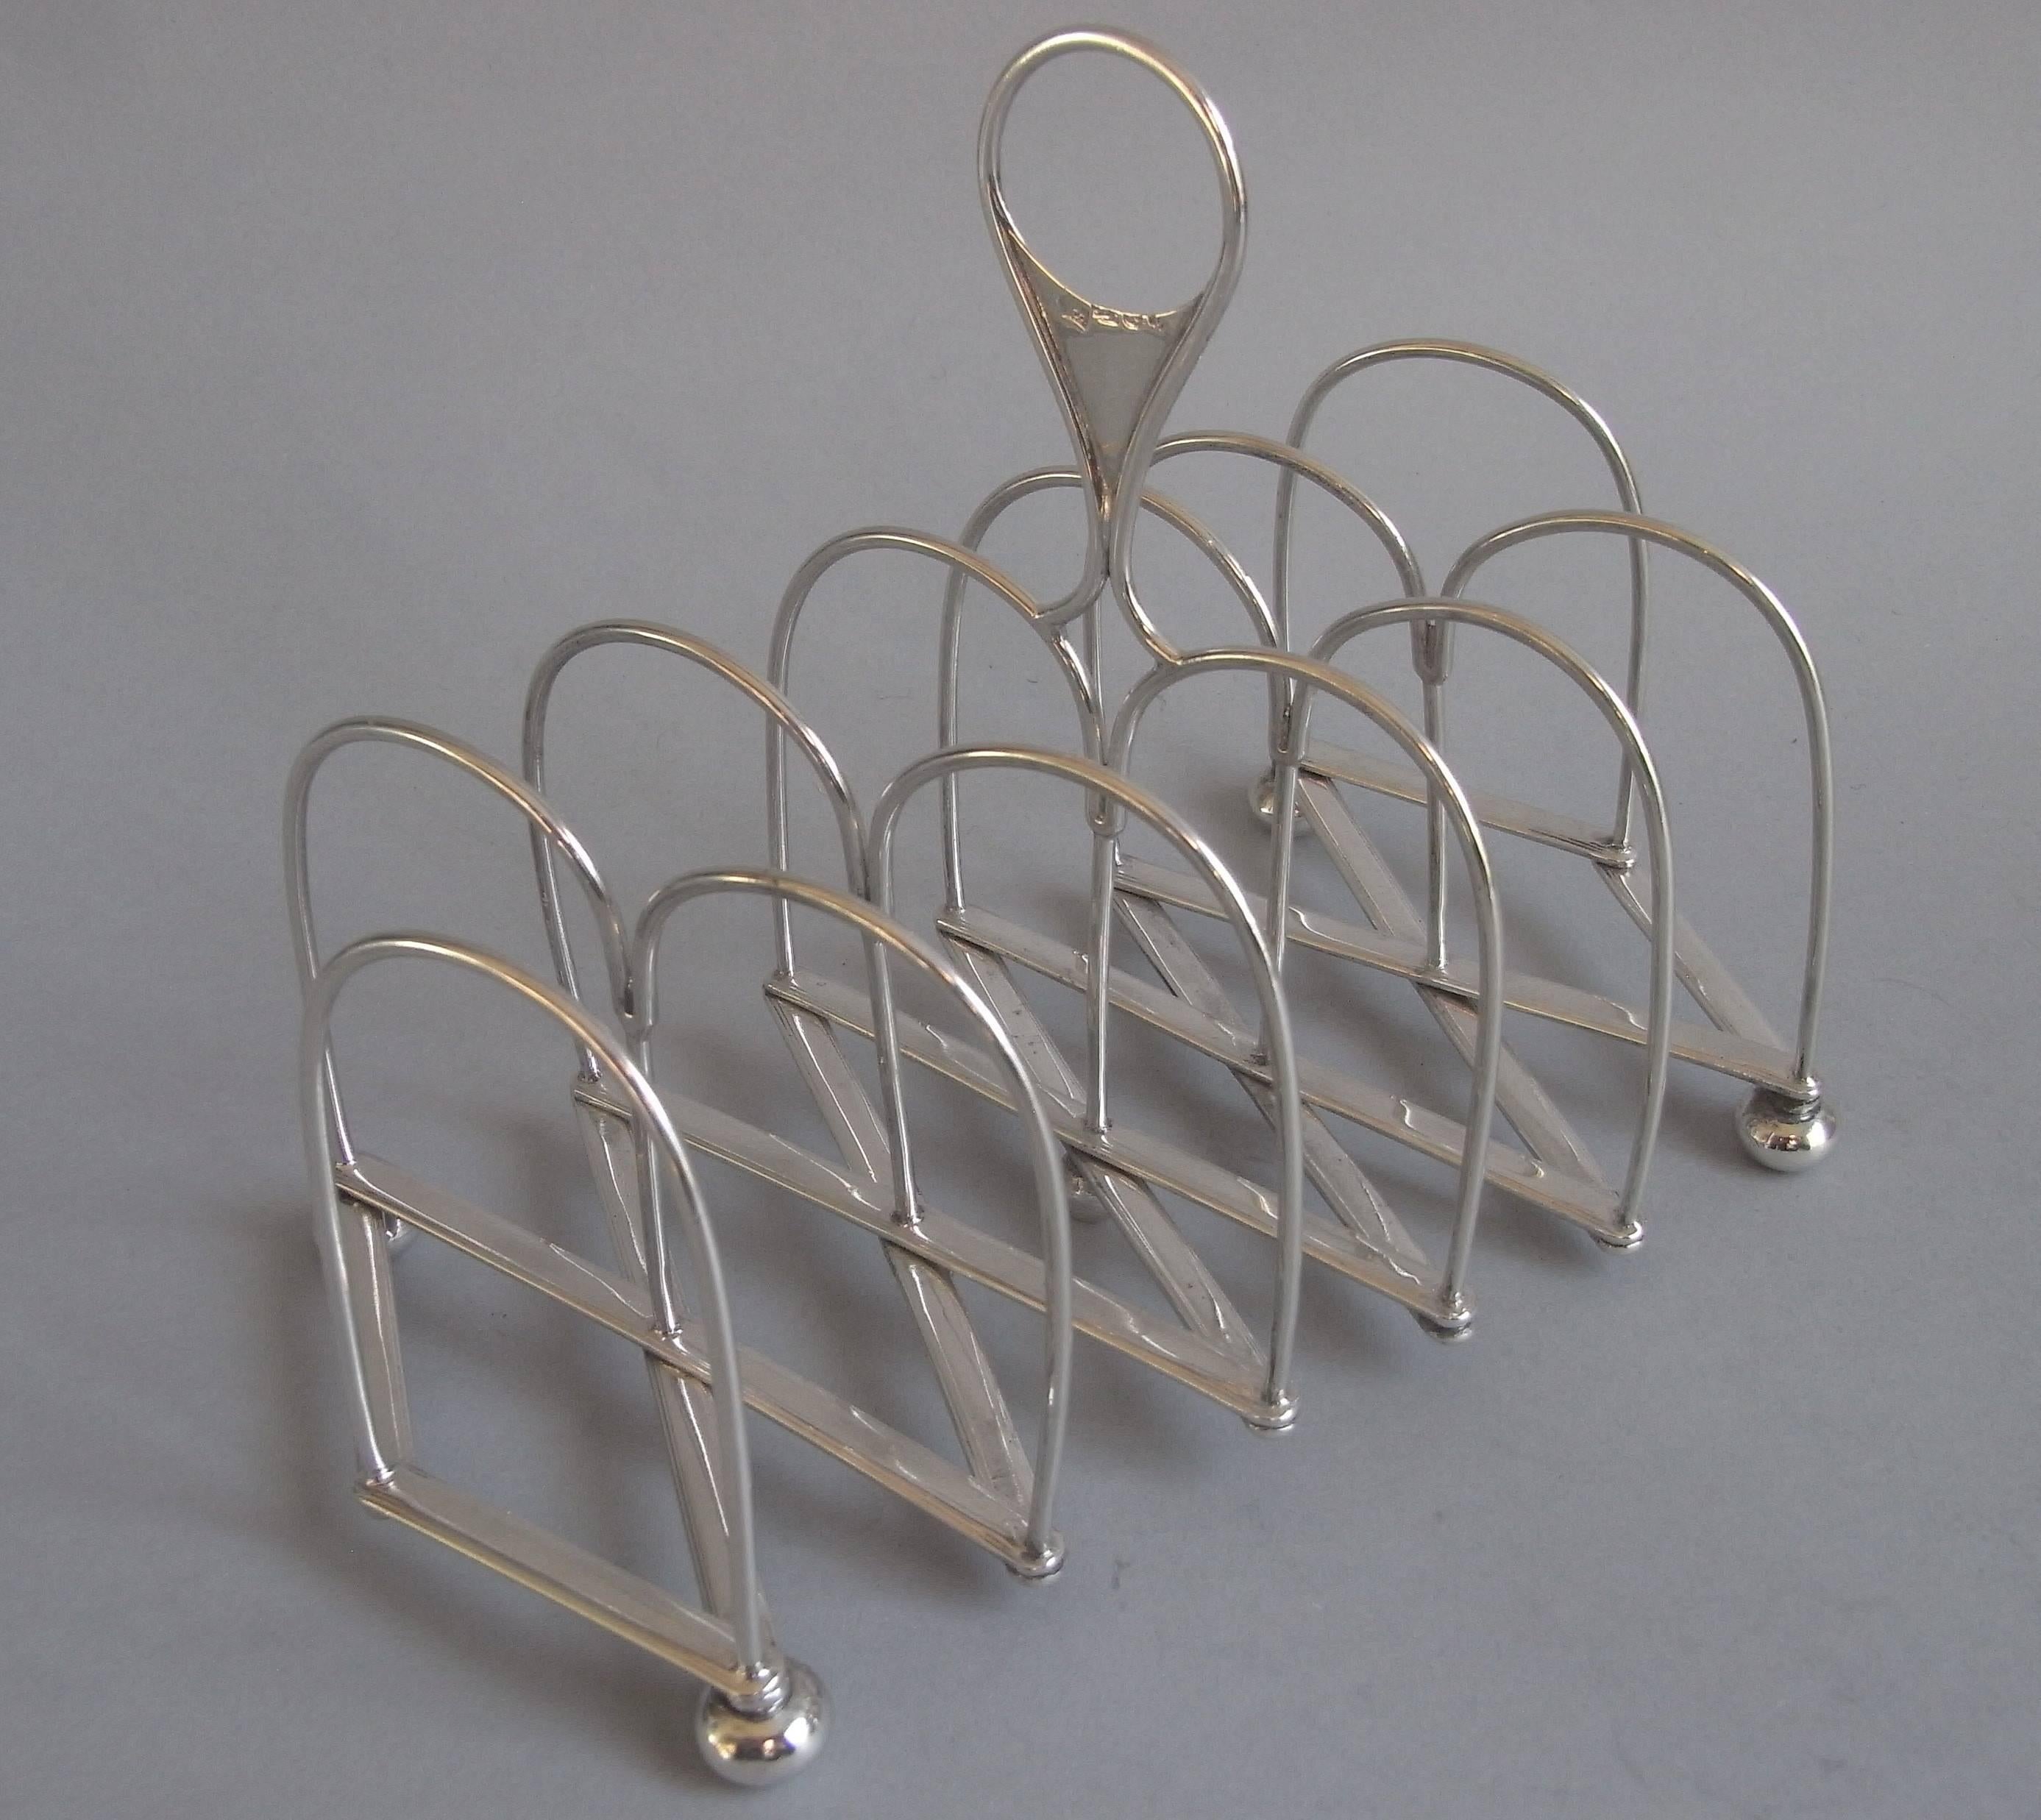 A very rare "Concertina" Toast Rack made in Sheffield by Samuel Roberts & Compan